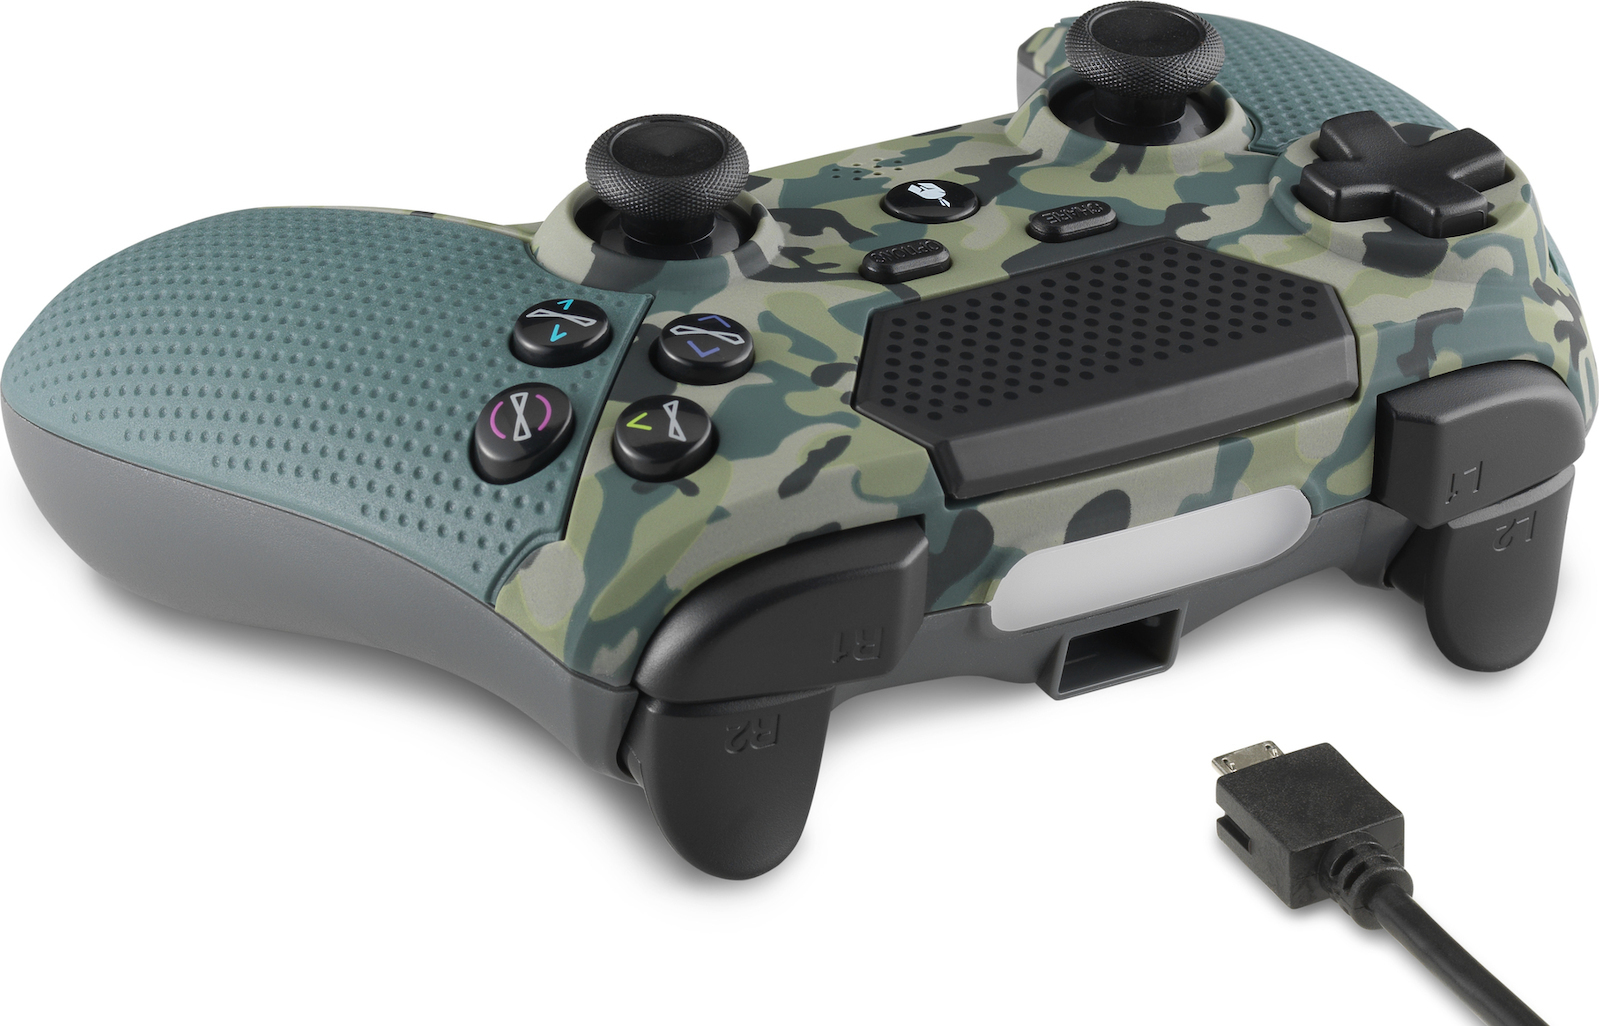 Spartan Gear - Aspis 3  Wireless & Wired Controller (Compatible with Playstation 4 [wireless] and PC [wired] )(color Green Camo)